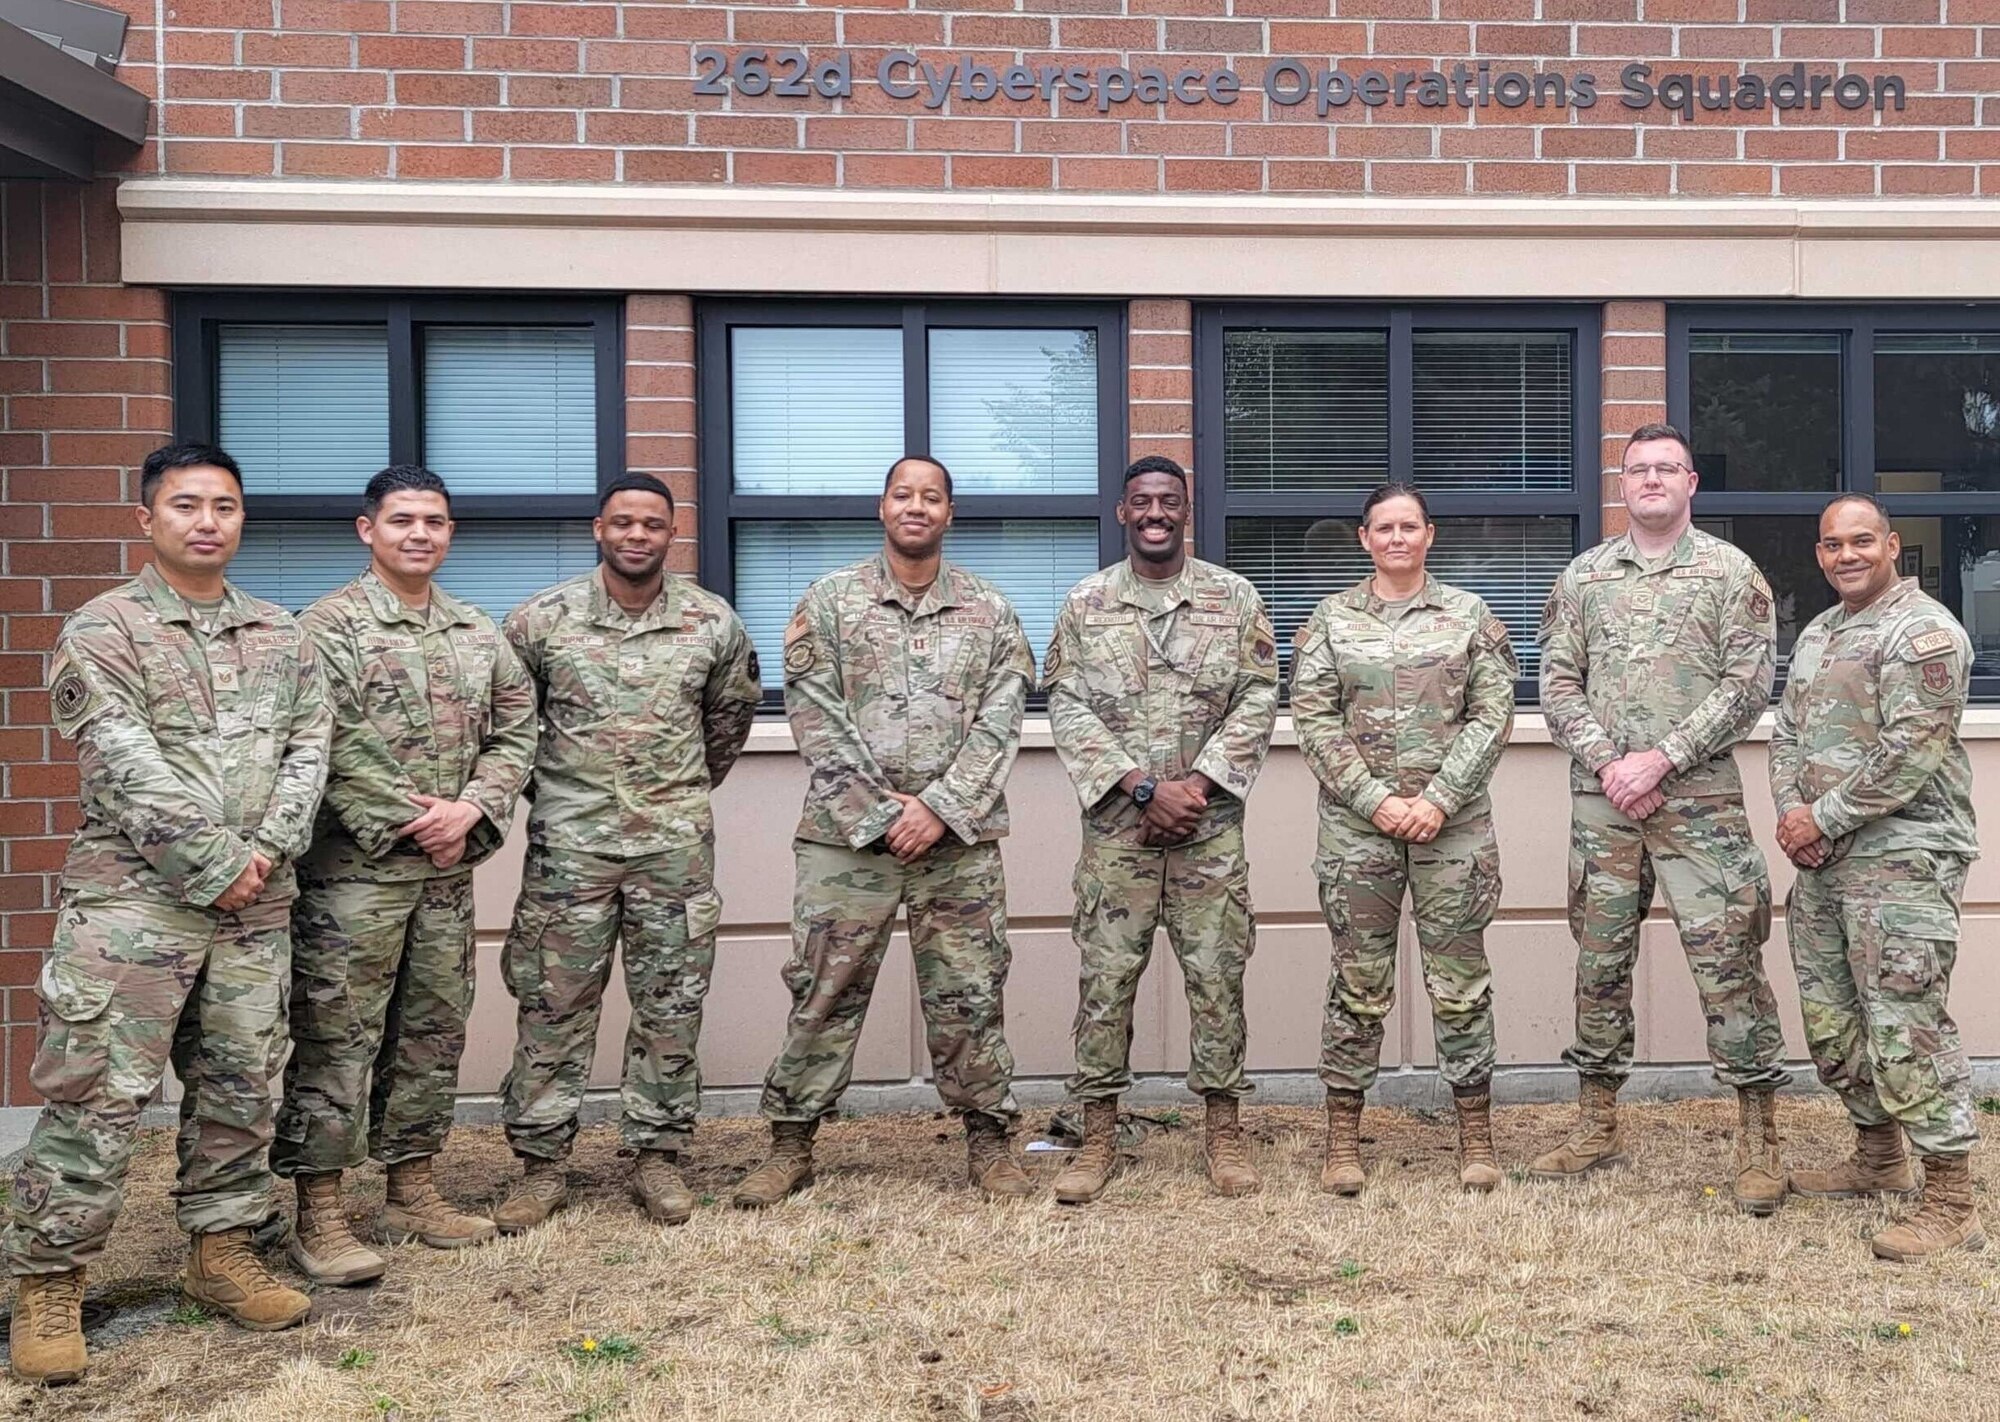 Capts. Quenton Rexworth (center-right) and Kendall Dyson of the 143rd Cyber Operations Squadron pose with the 426 NWS members in front of the 262nd Cyberspace Operations Squadron headquarters at Joint Base Lewis-McChord, Washington on Sept. 1, 2023. (Courtesy photo)